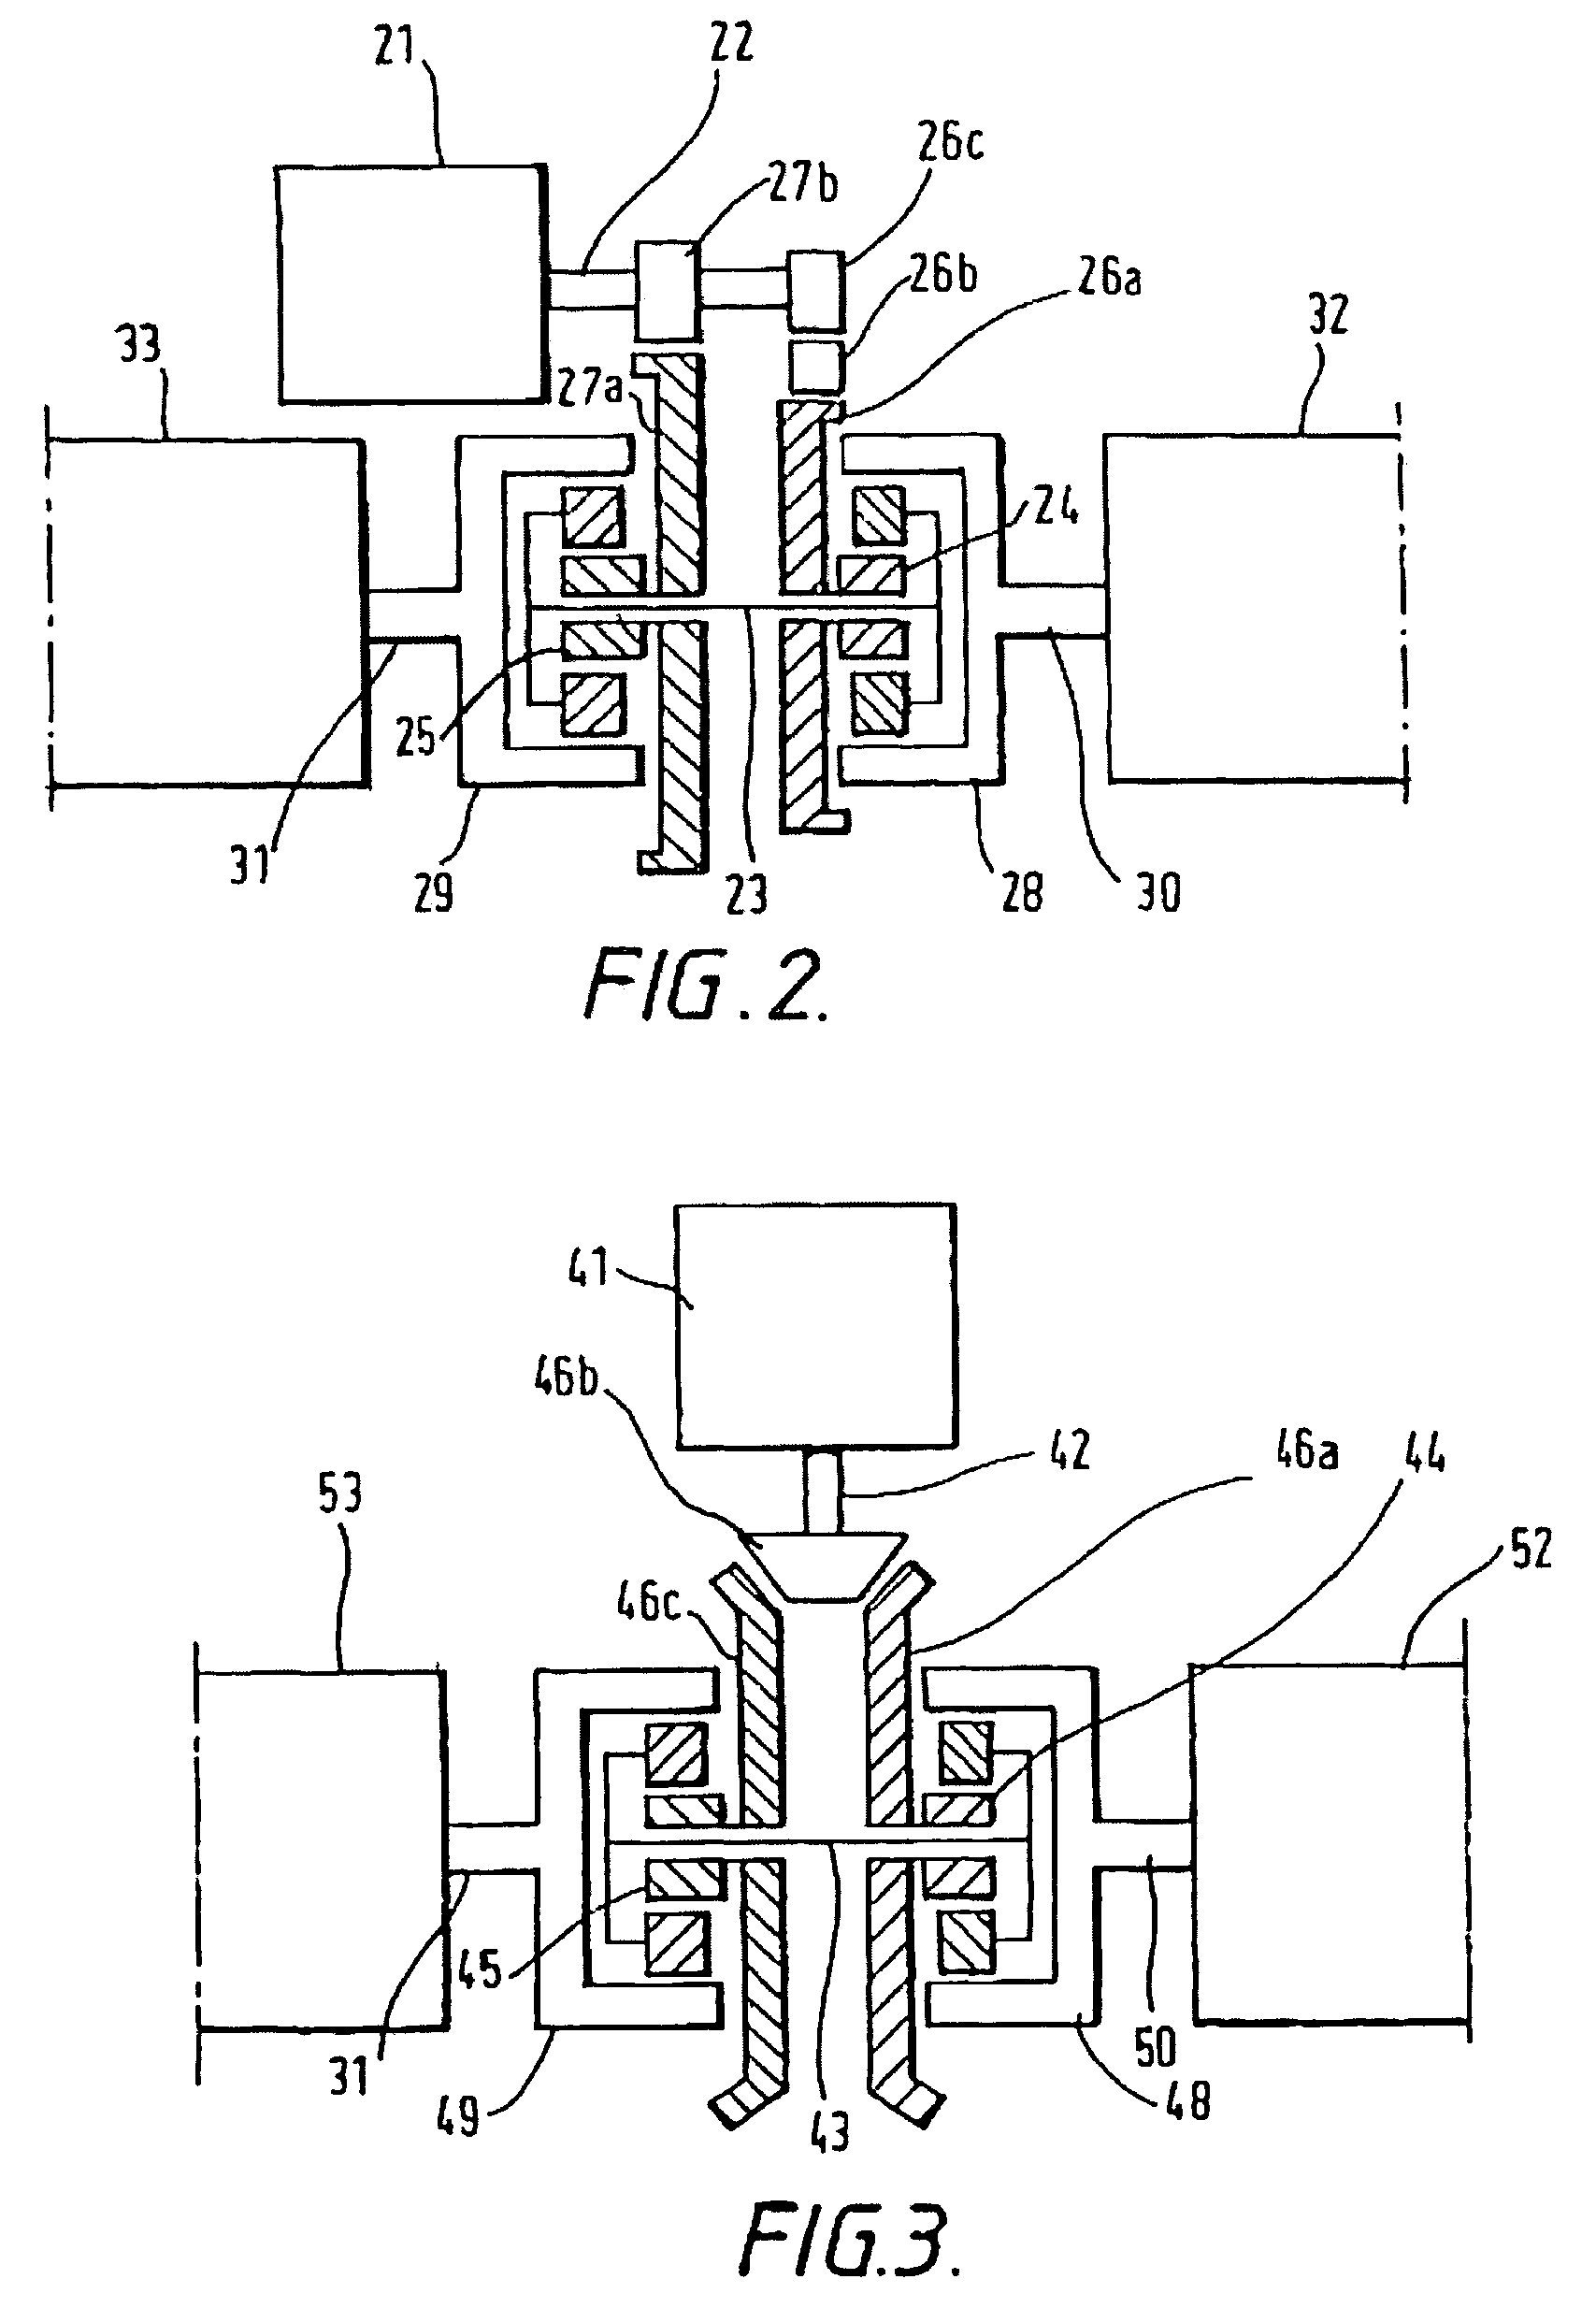 Drive configuration for a skid steered vehicle